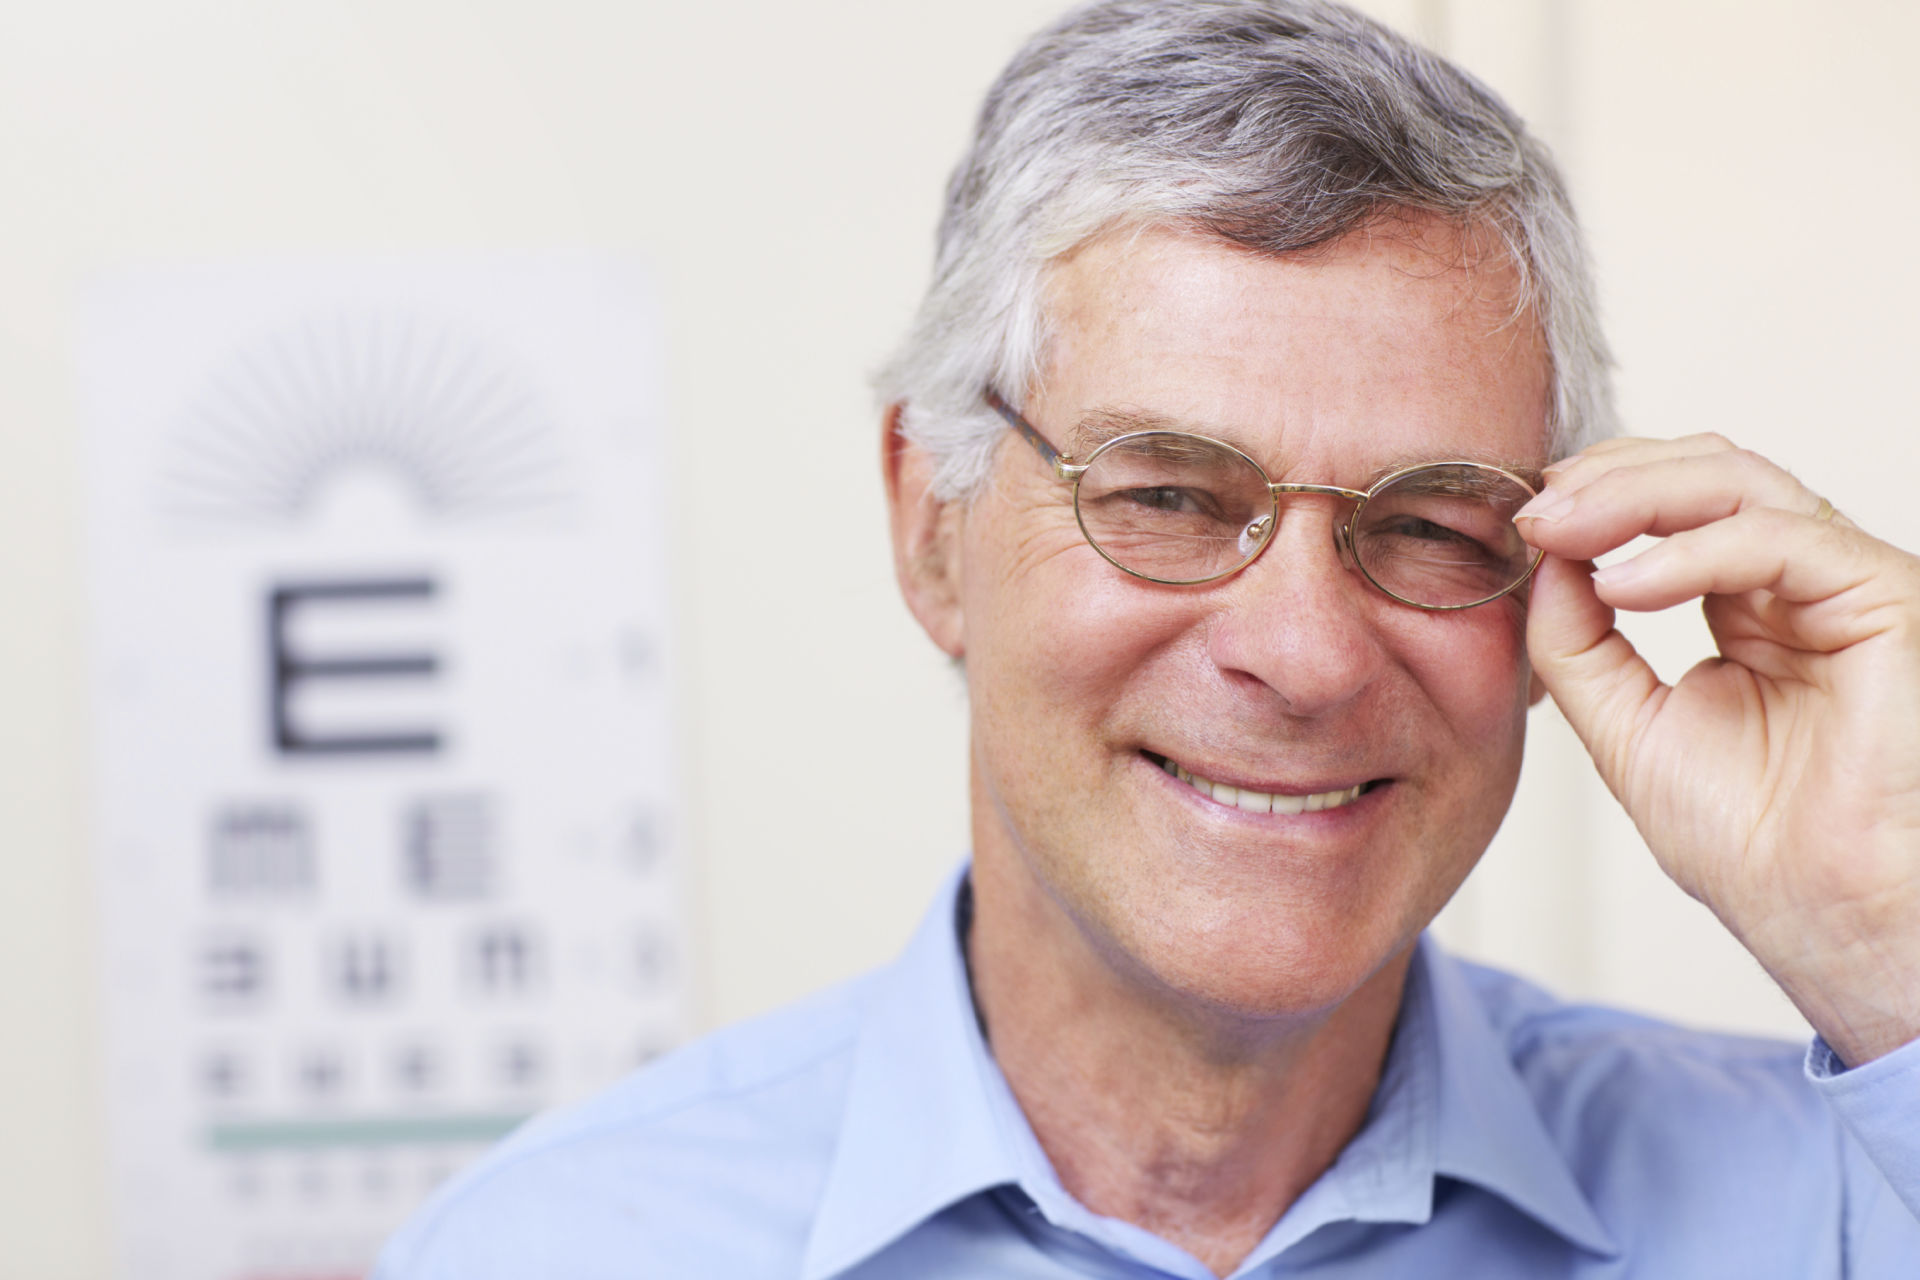 Exciting News From Eyesight Associates About Laser Vision Correction